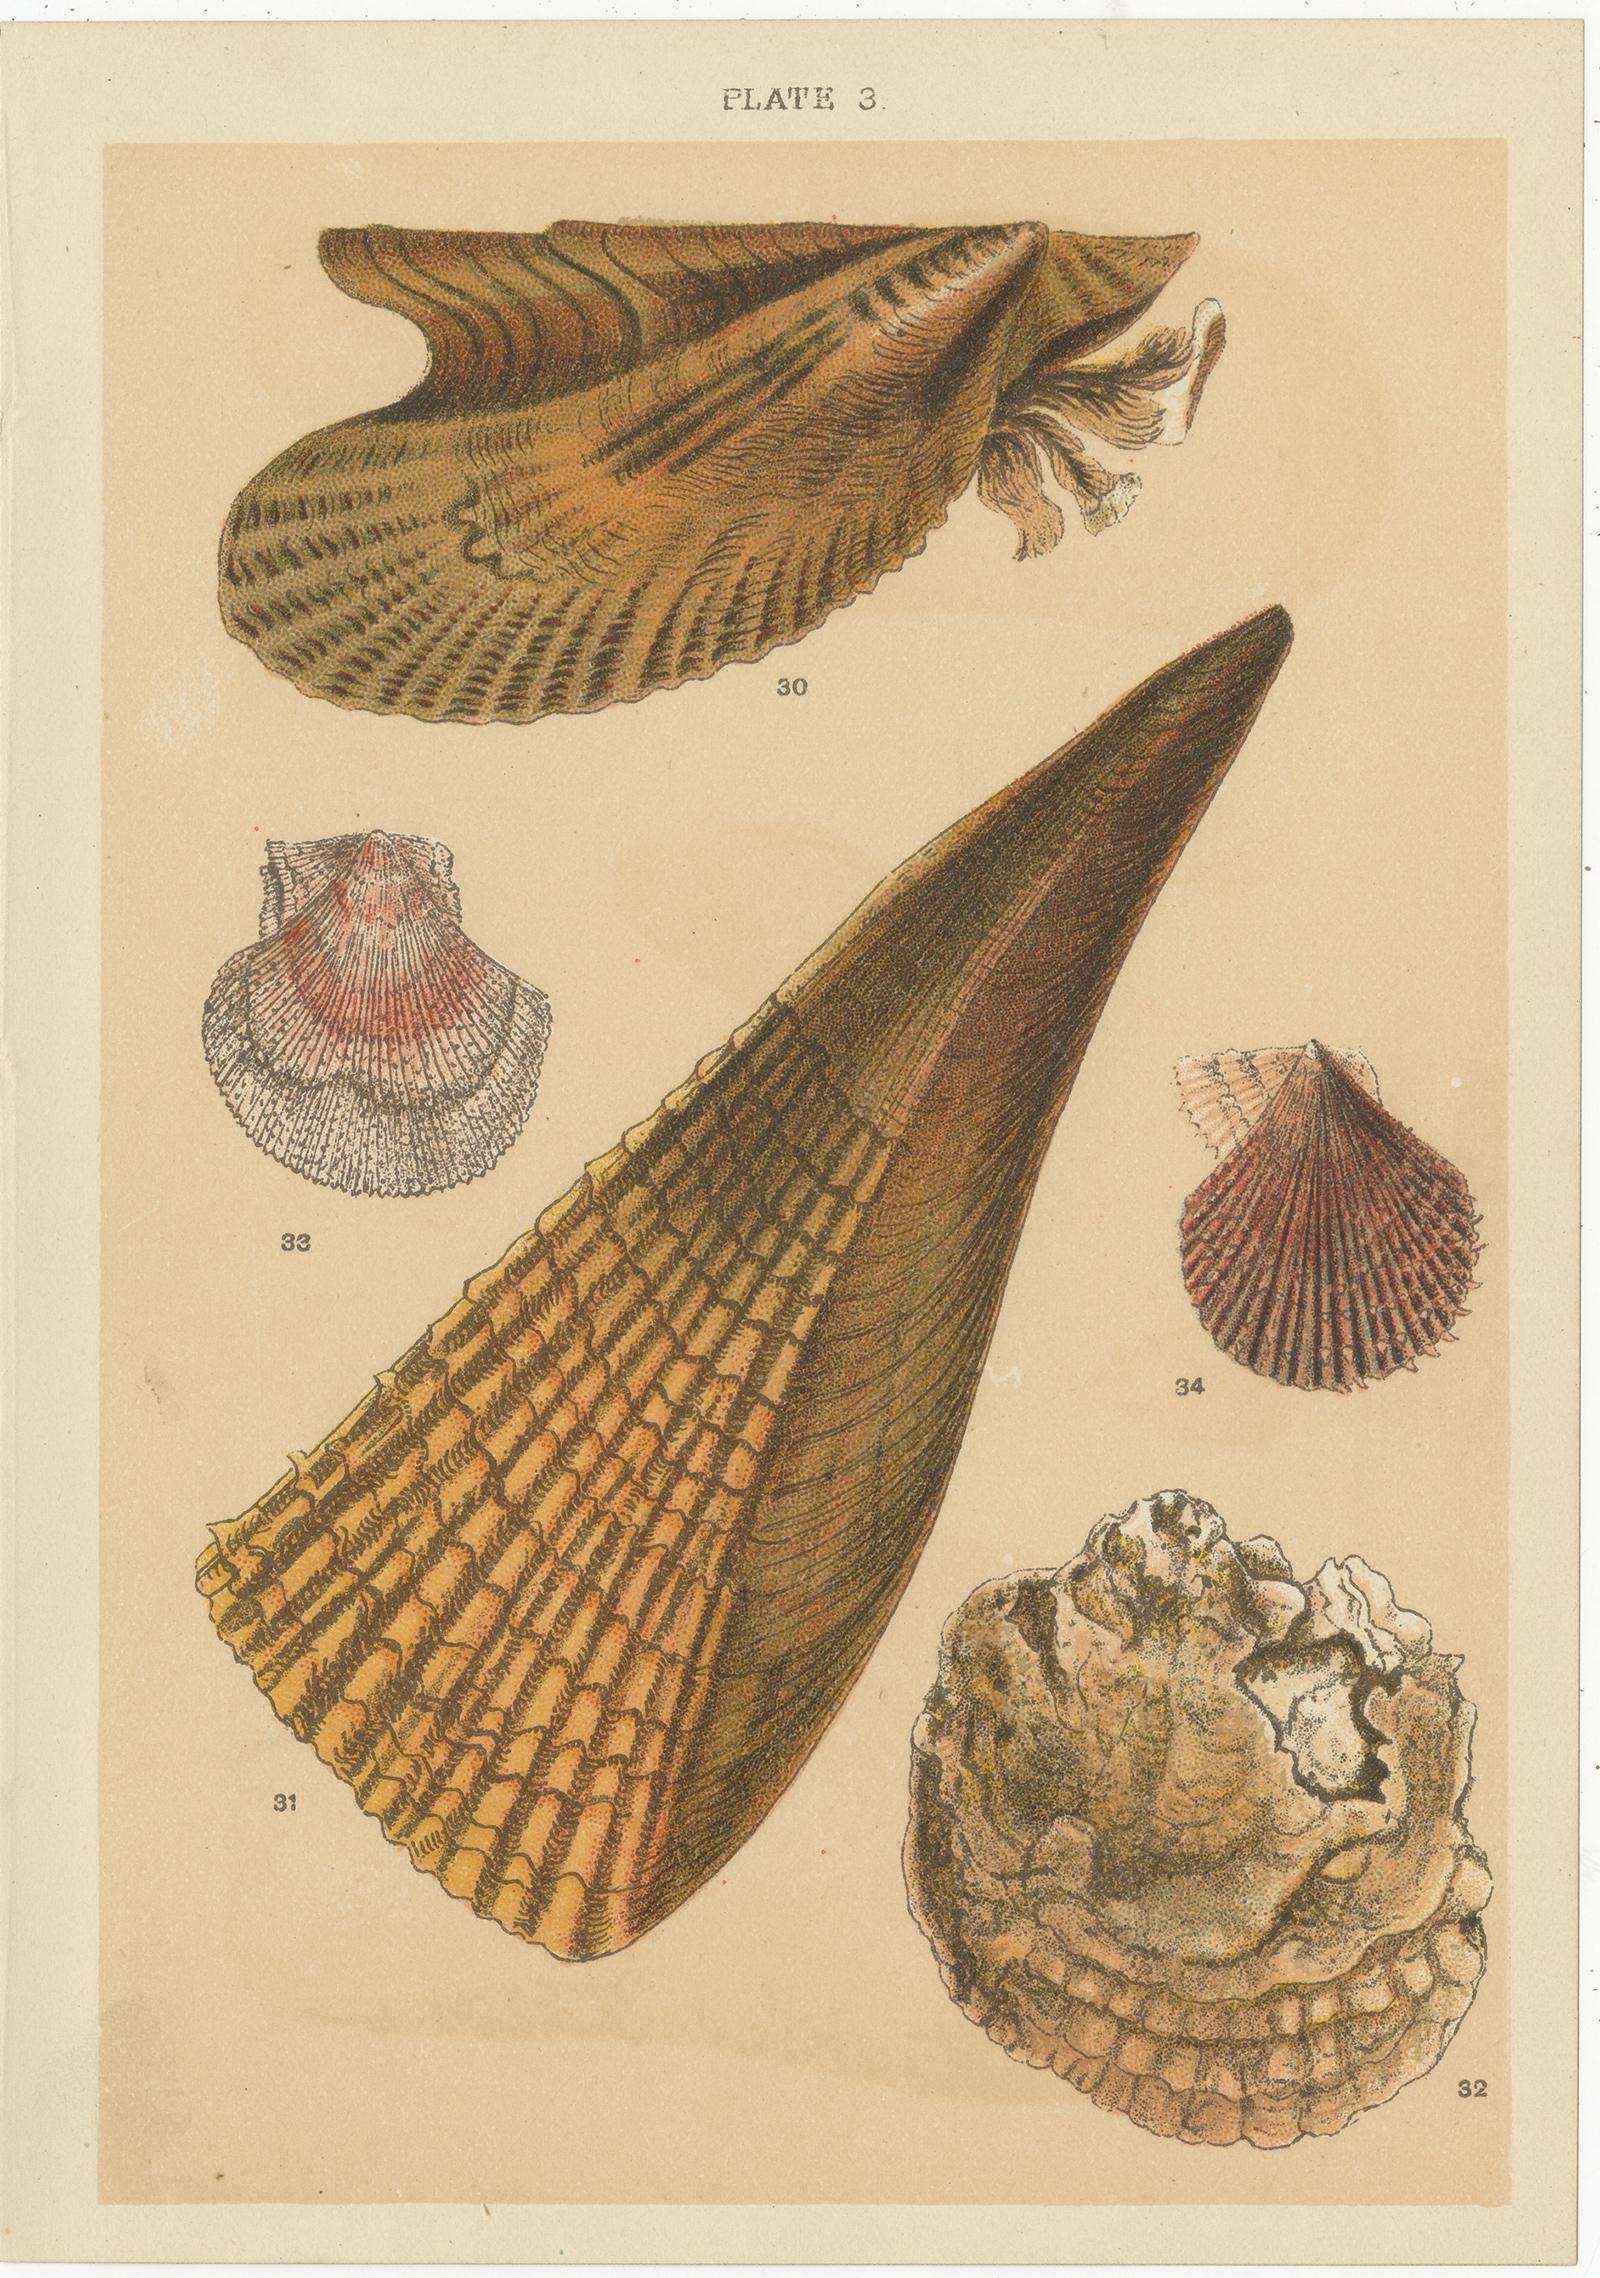 Set of 10 Antique Prints of Shells Including Molluscs by Gordon 'circa 1900' For Sale 3